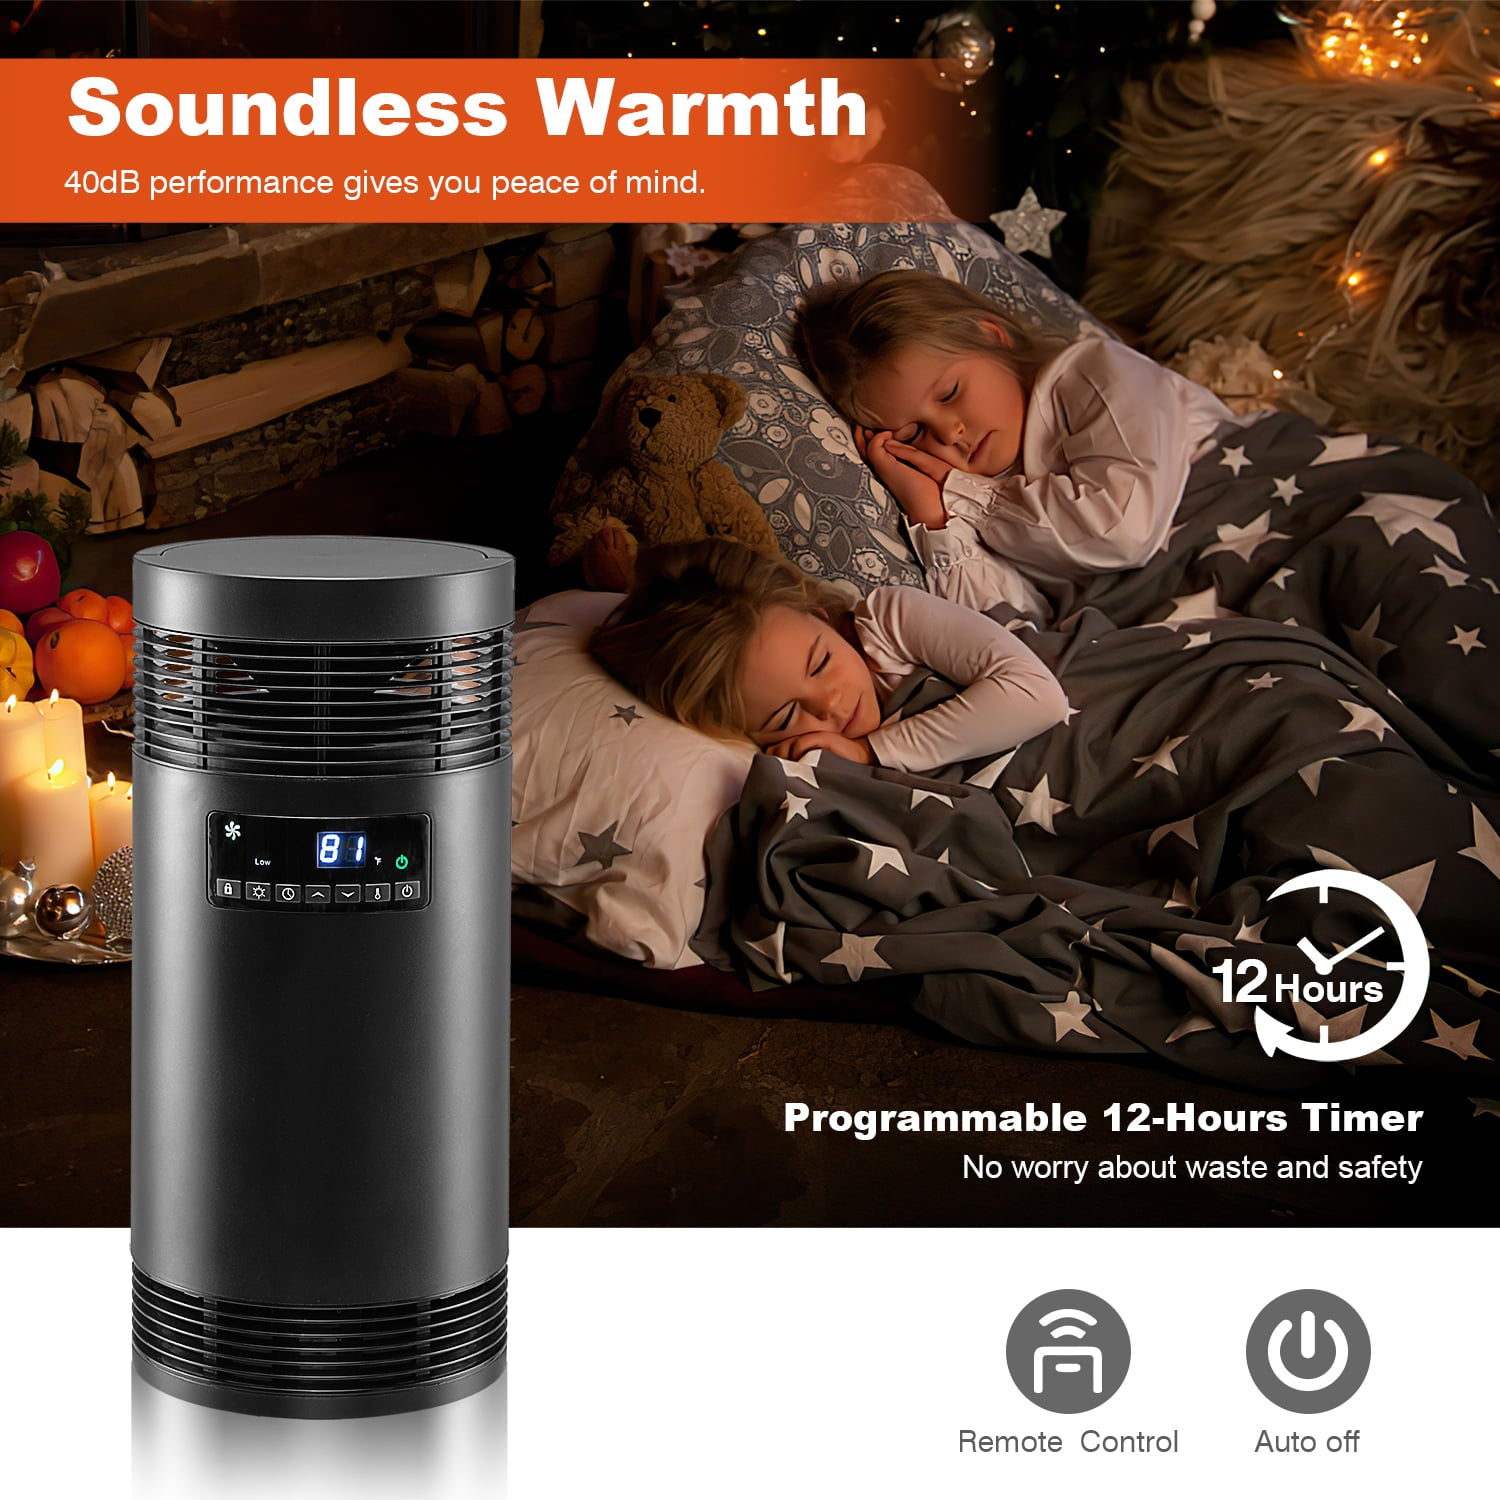 Wewarm 360 Digital Surround Space Heater, 1500W Ceramic Electric Heater with Thermostat